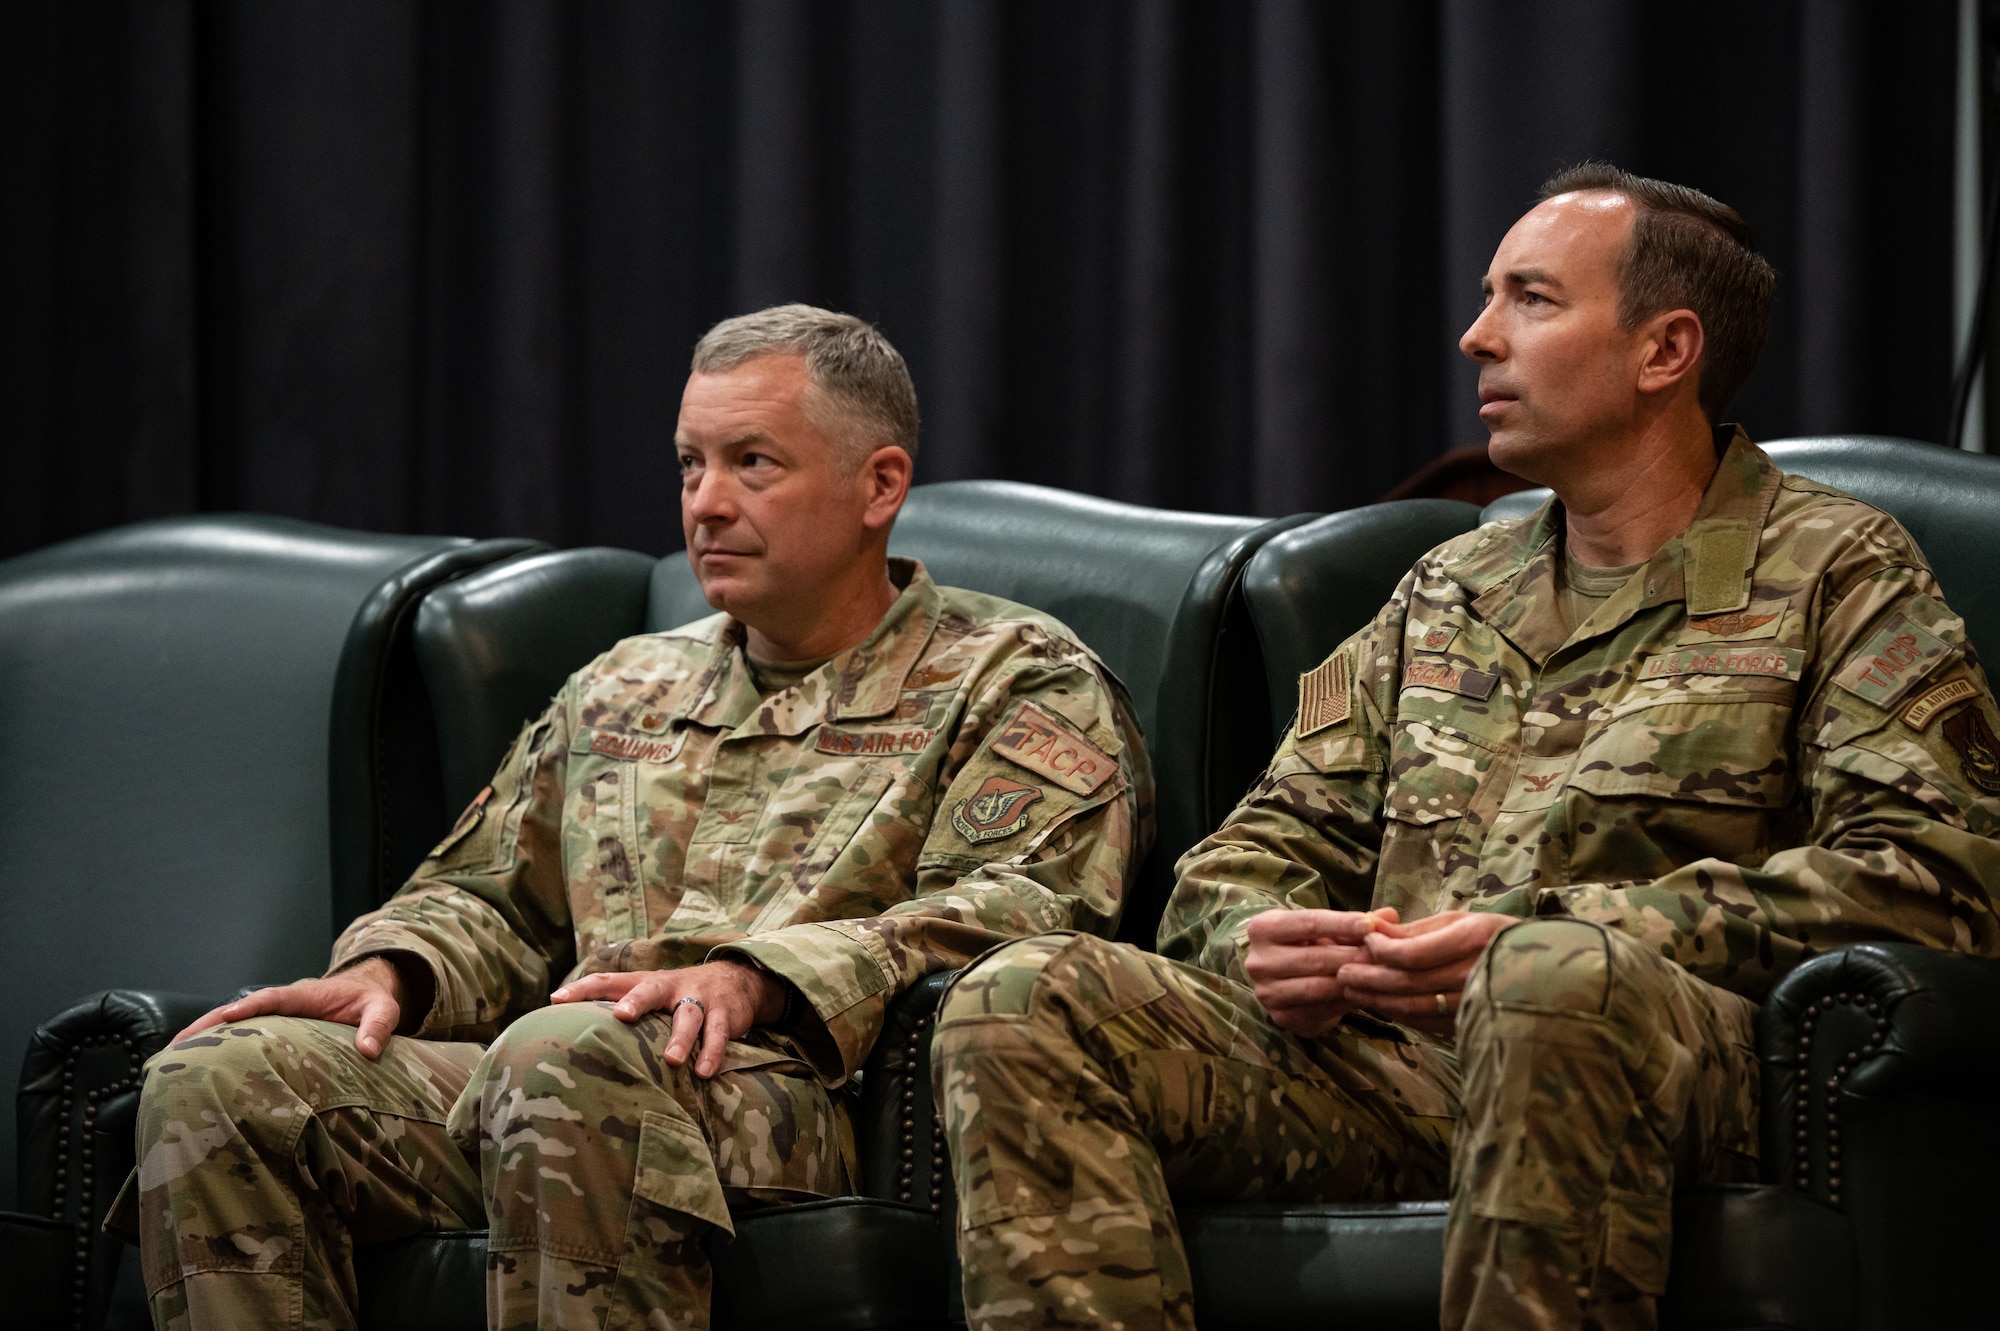 Col. William Edmunds, 607th Air Support Operations Group commander, left, and Col. Scott Morgan, 607th ASOG inbound commander, listen to remarks during the 607th ASOG change of command ceremony at Osan Air Base, Republic of Korea, June 22, 2021. Brig Gen. Jason Rueschhoff, 7th Air Force deputy commander, provided remarks as the Presiding Officer. (U.S. Air Force photo by Tech. Sgt. Nicholas Alder)